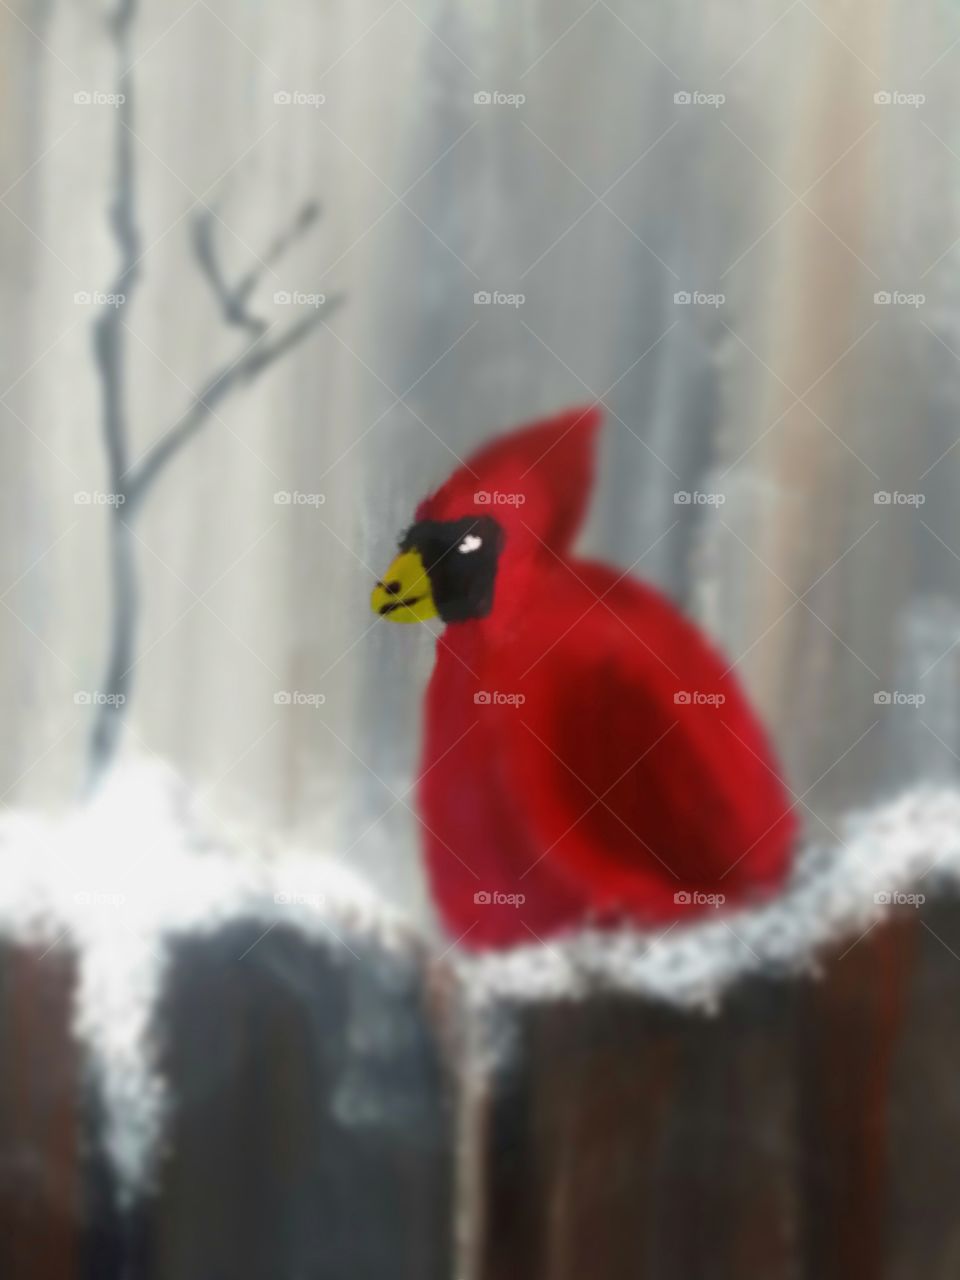 chubby fat Angry Red Cardinal snow fence